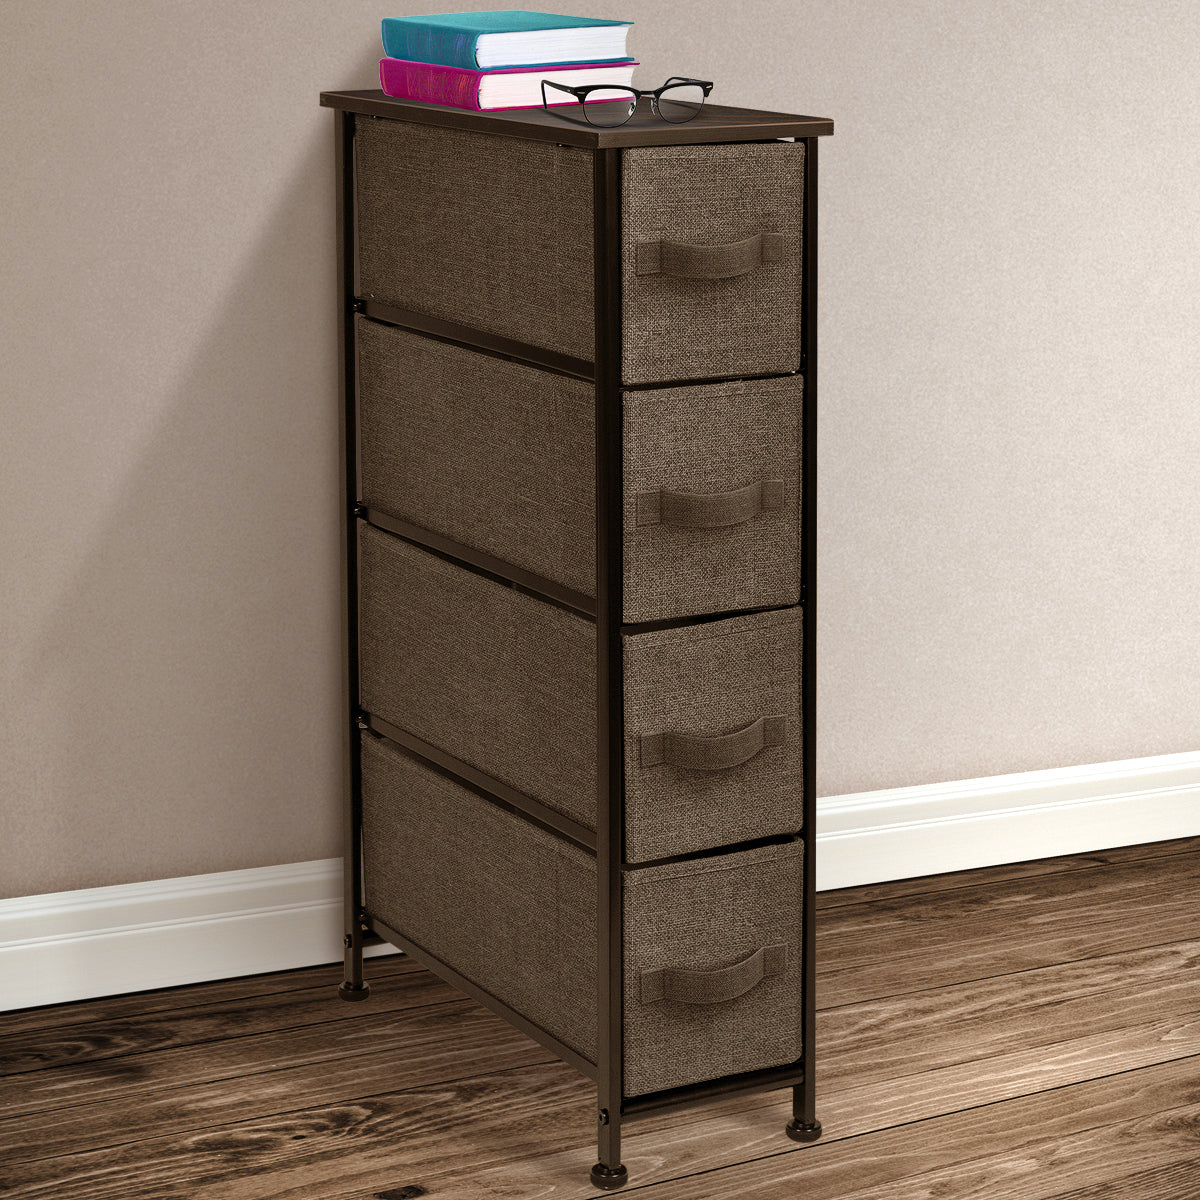 Sorbus Dresser with Drawers - Furniture Storage Organizer Unit Chest for Bedroom 4- Drawer in Beige